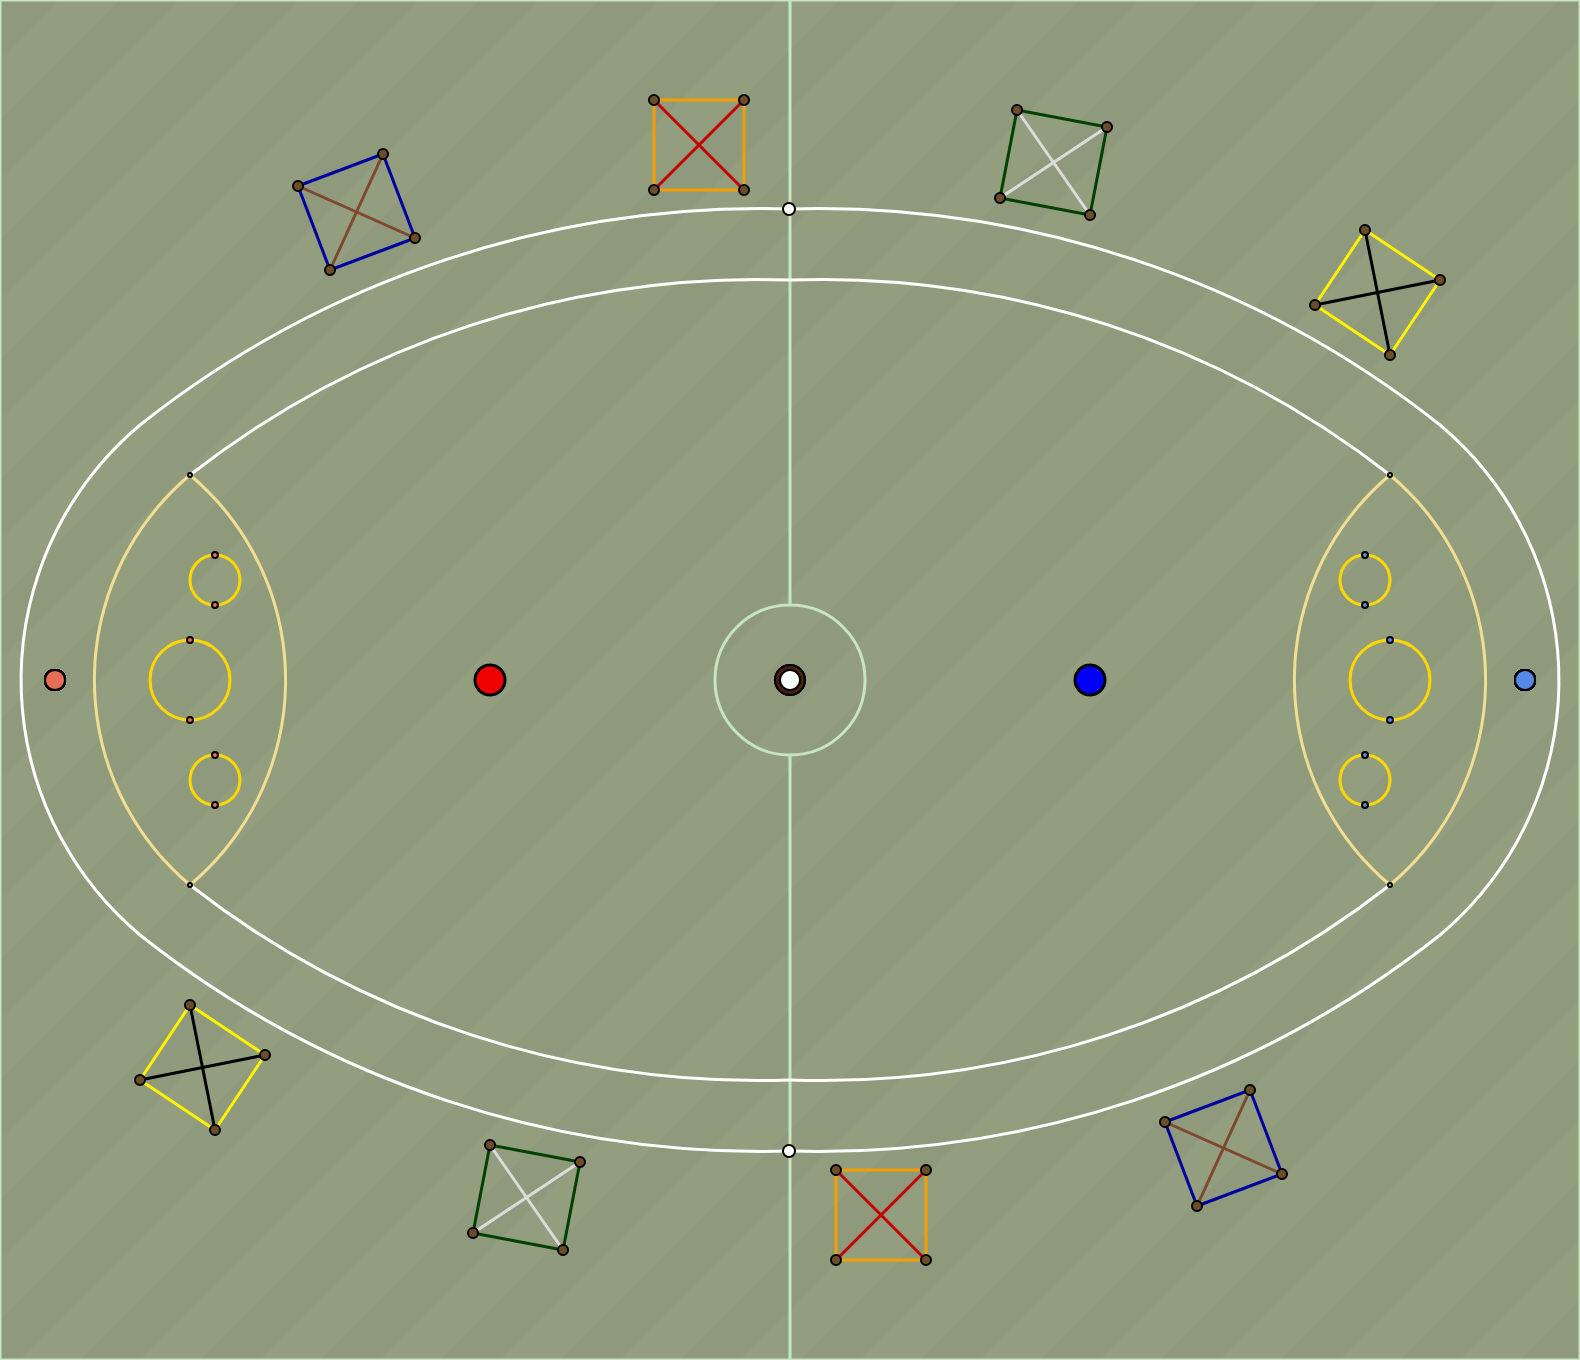 hax ball maps | Quidditch for HTML5 v2